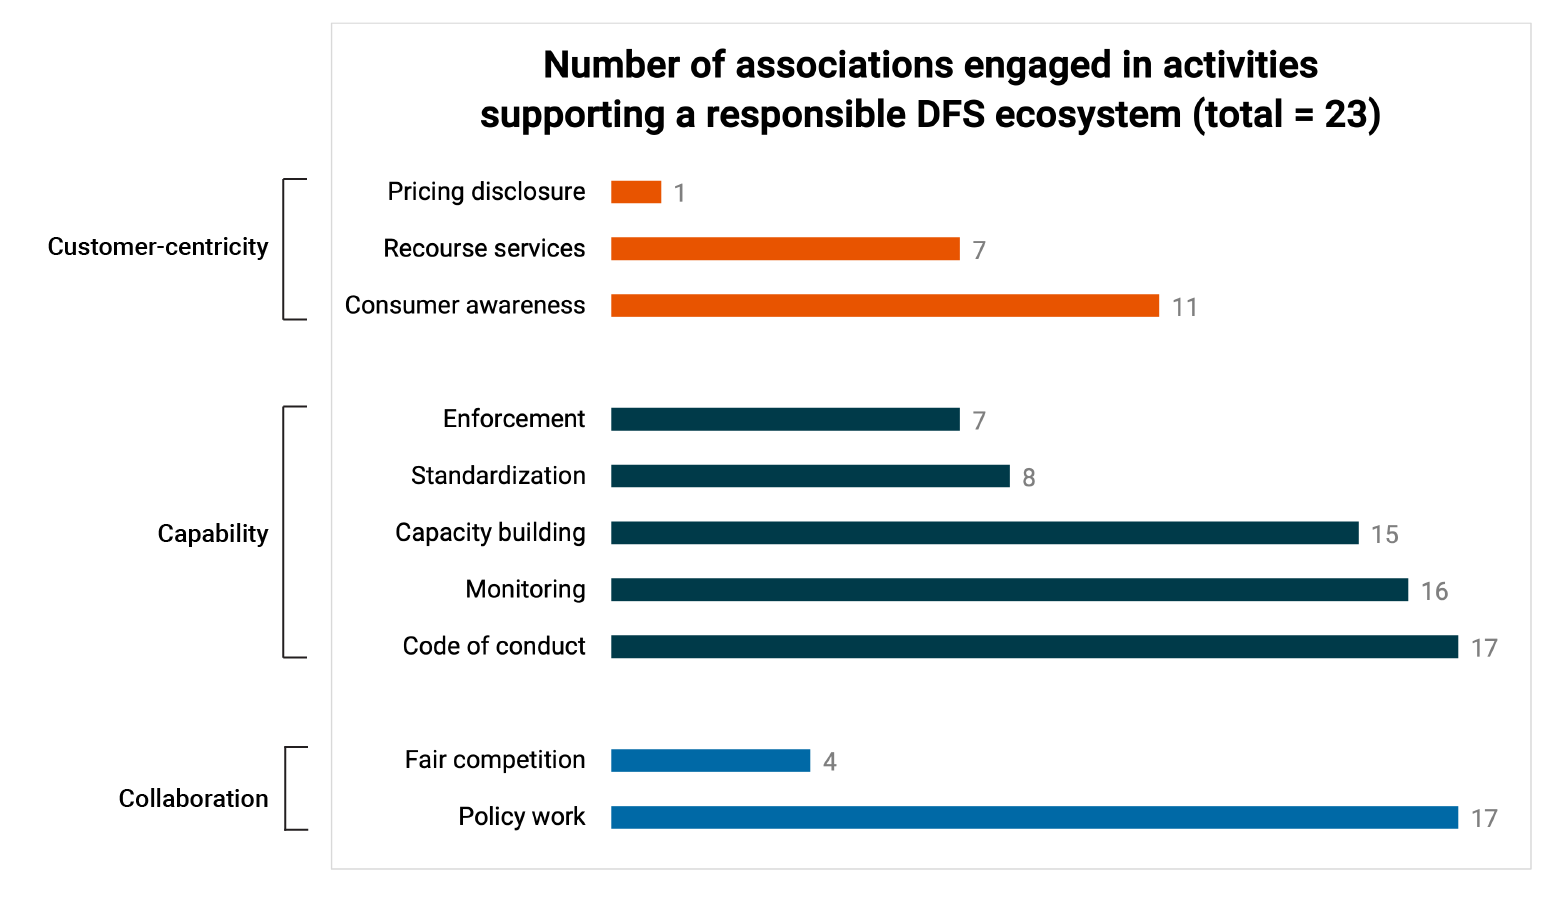 Number of associations engaged in activities supporting a responsible DFS ecosystem 